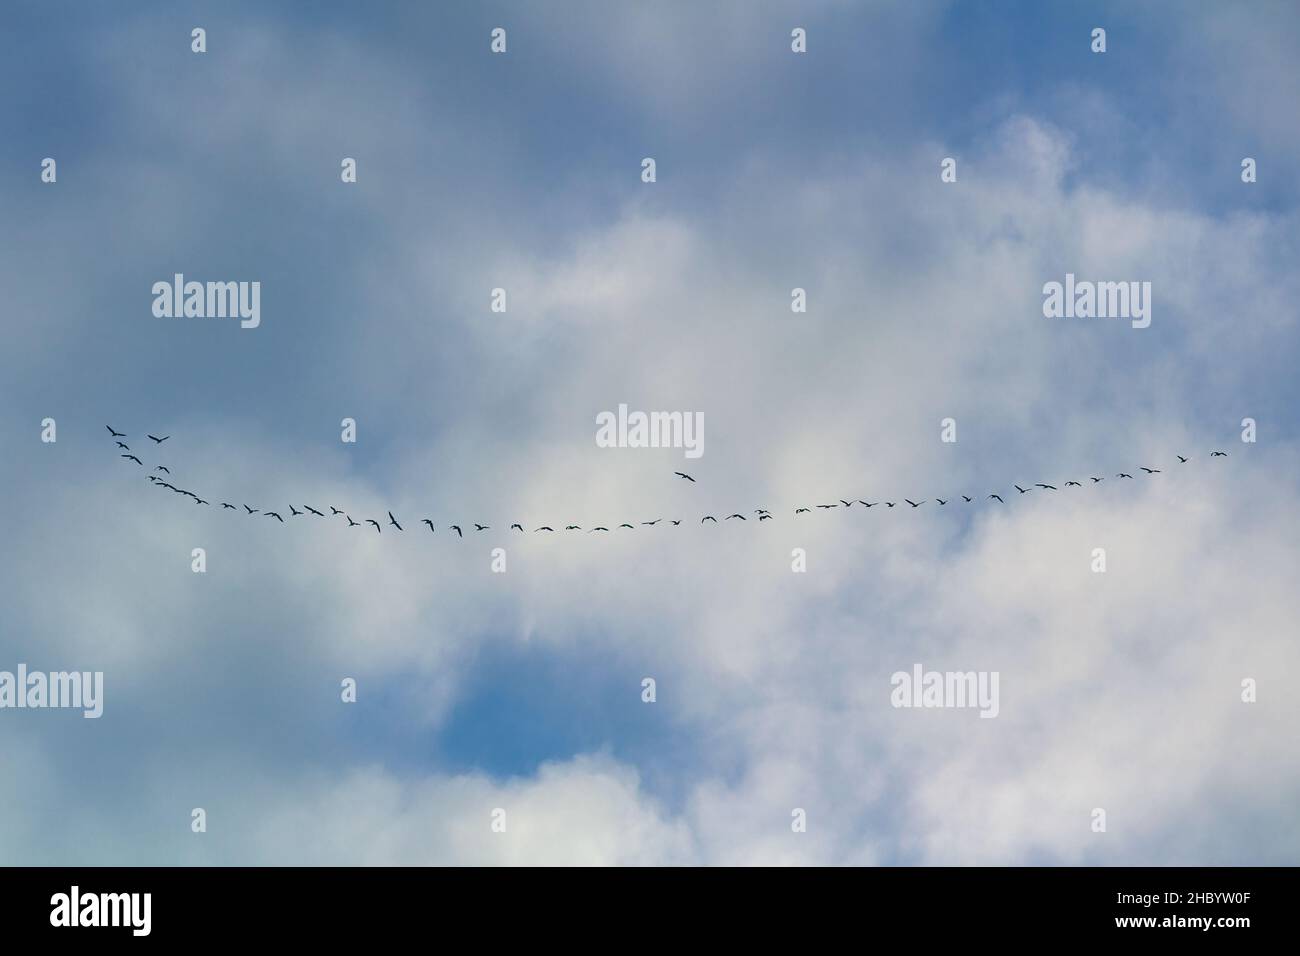 Silhouette of birds flock flying on cloudy sky. Migrating animals Stock Photo